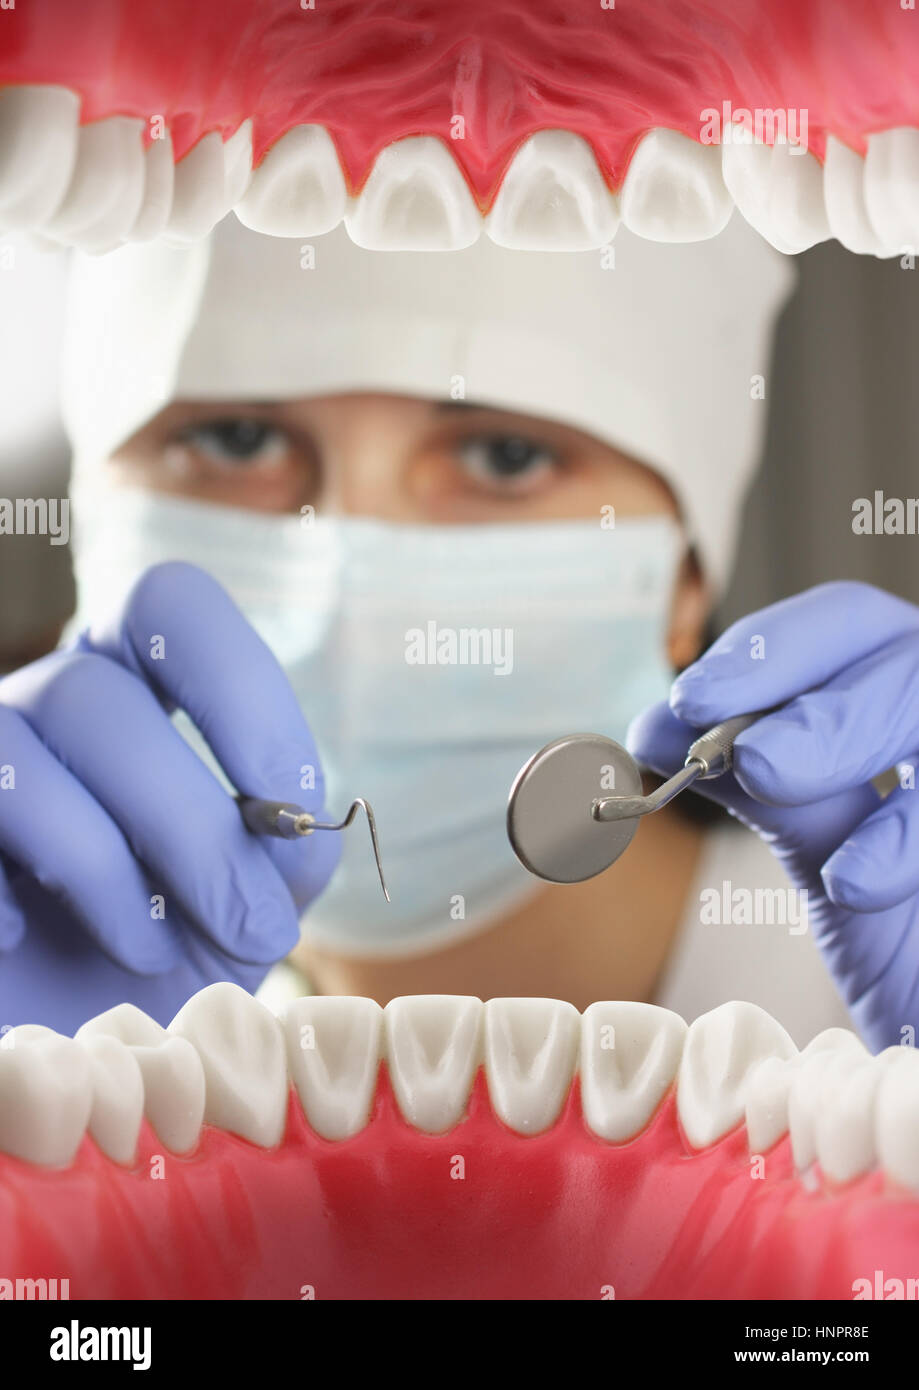 Dentist examining teeth, Inside mouth view. Soft focus Stock Photo